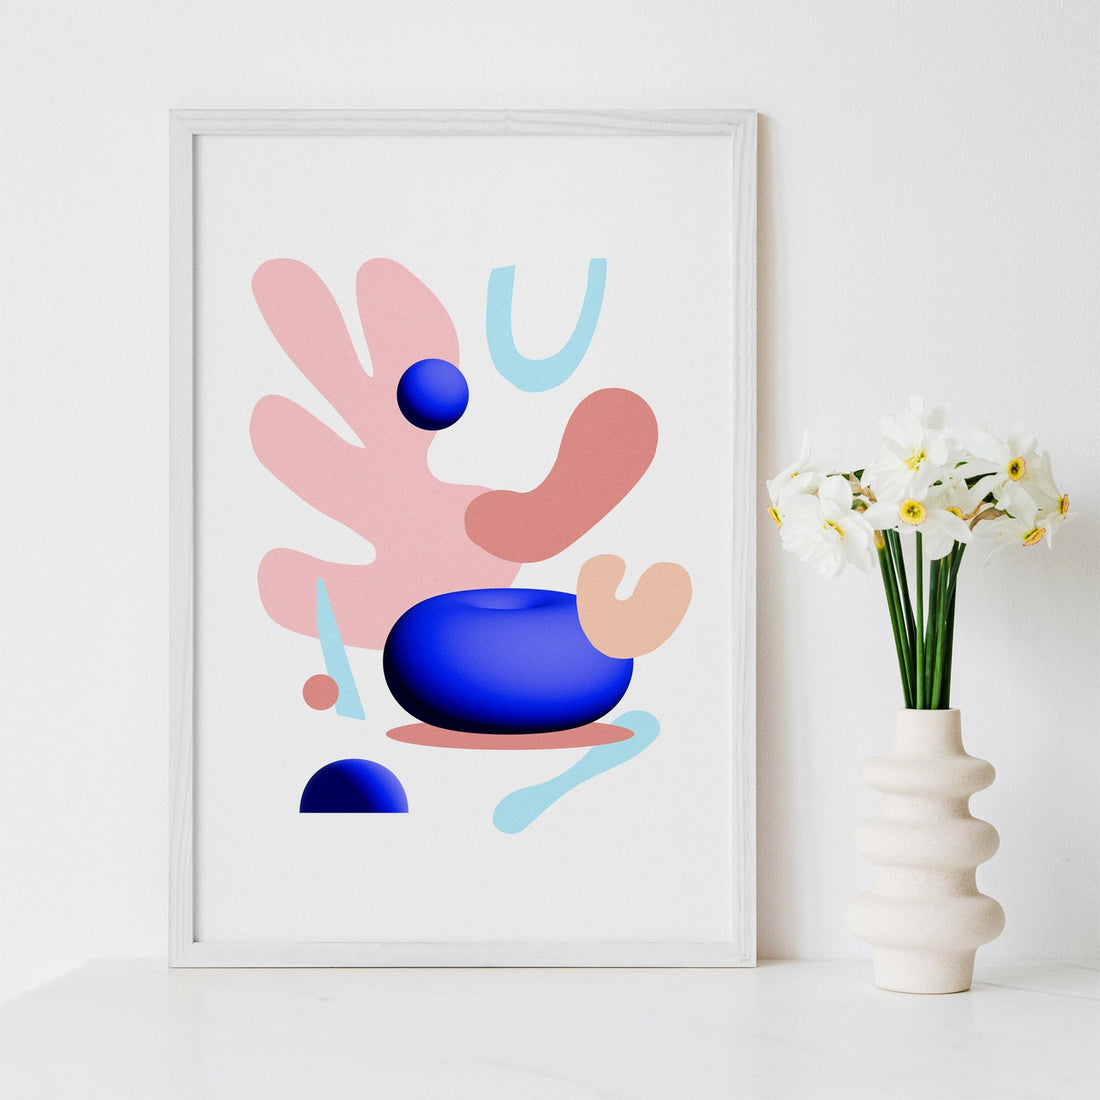 pink and blue geometric shapes inspired art print